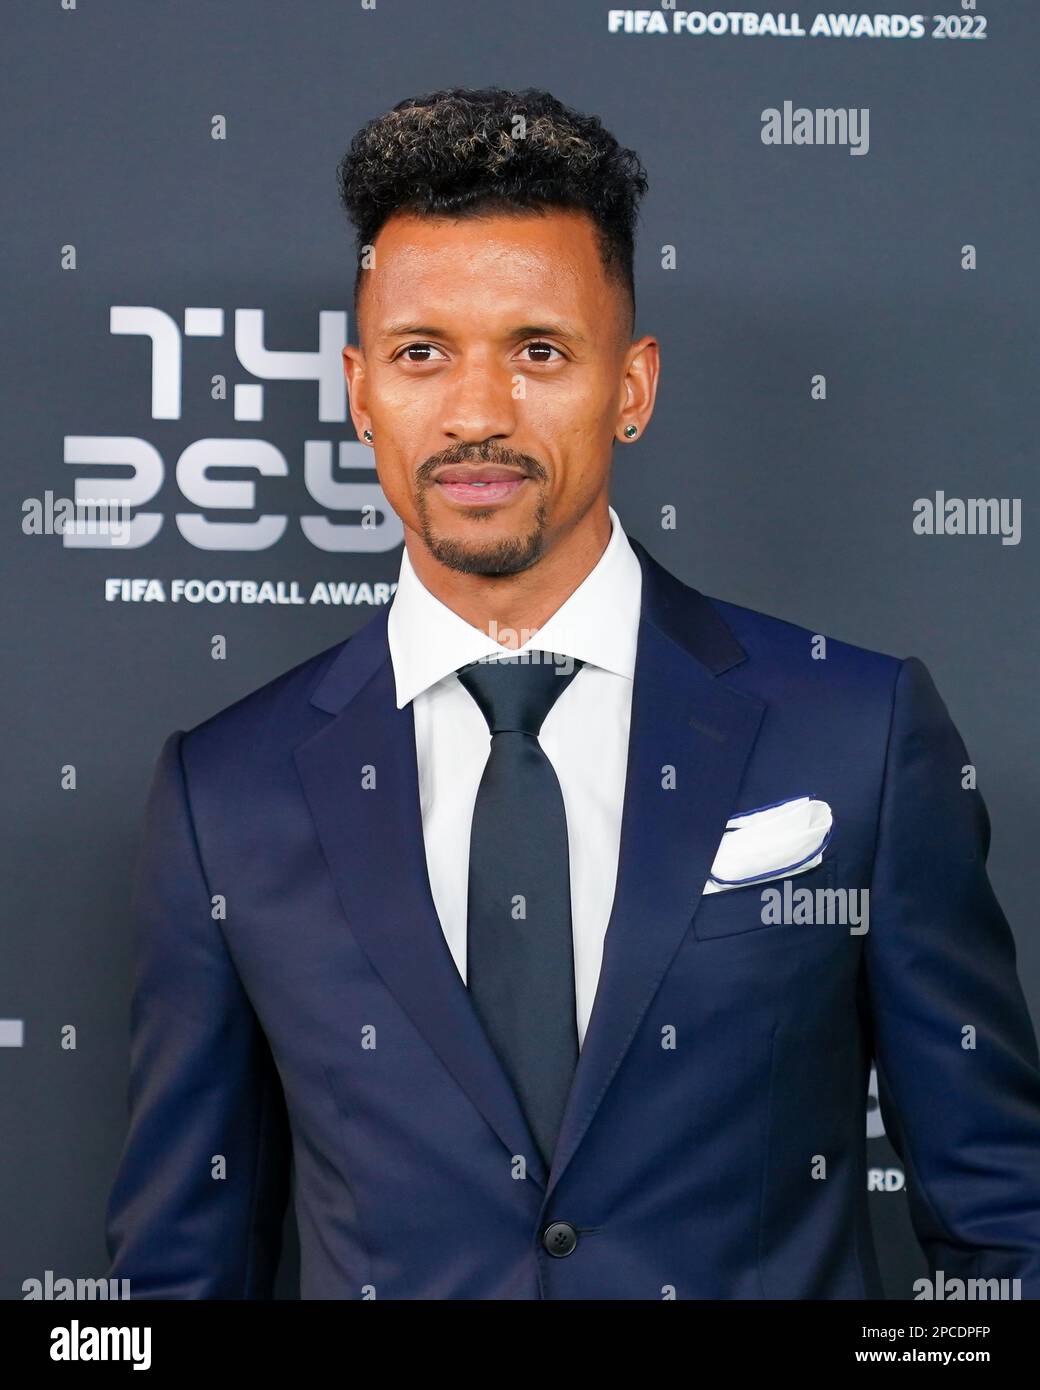 Paris, France. 27th Feb, 2023. Luis Nani - football player of Portugal - during the The Best FIFA Football Awards 2022 at Salle Pleyel in Paris, France. (Foto: Daniela Porcelli/Sports Press Photo/C - ONE HOUR DEADLINE - ONLY ACTIVATE FTP IF IMAGES LESS THAN ONE HOUR OLD - Alamy) Credit: SPP Sport Press Photo. /Alamy Live News Stock Photo